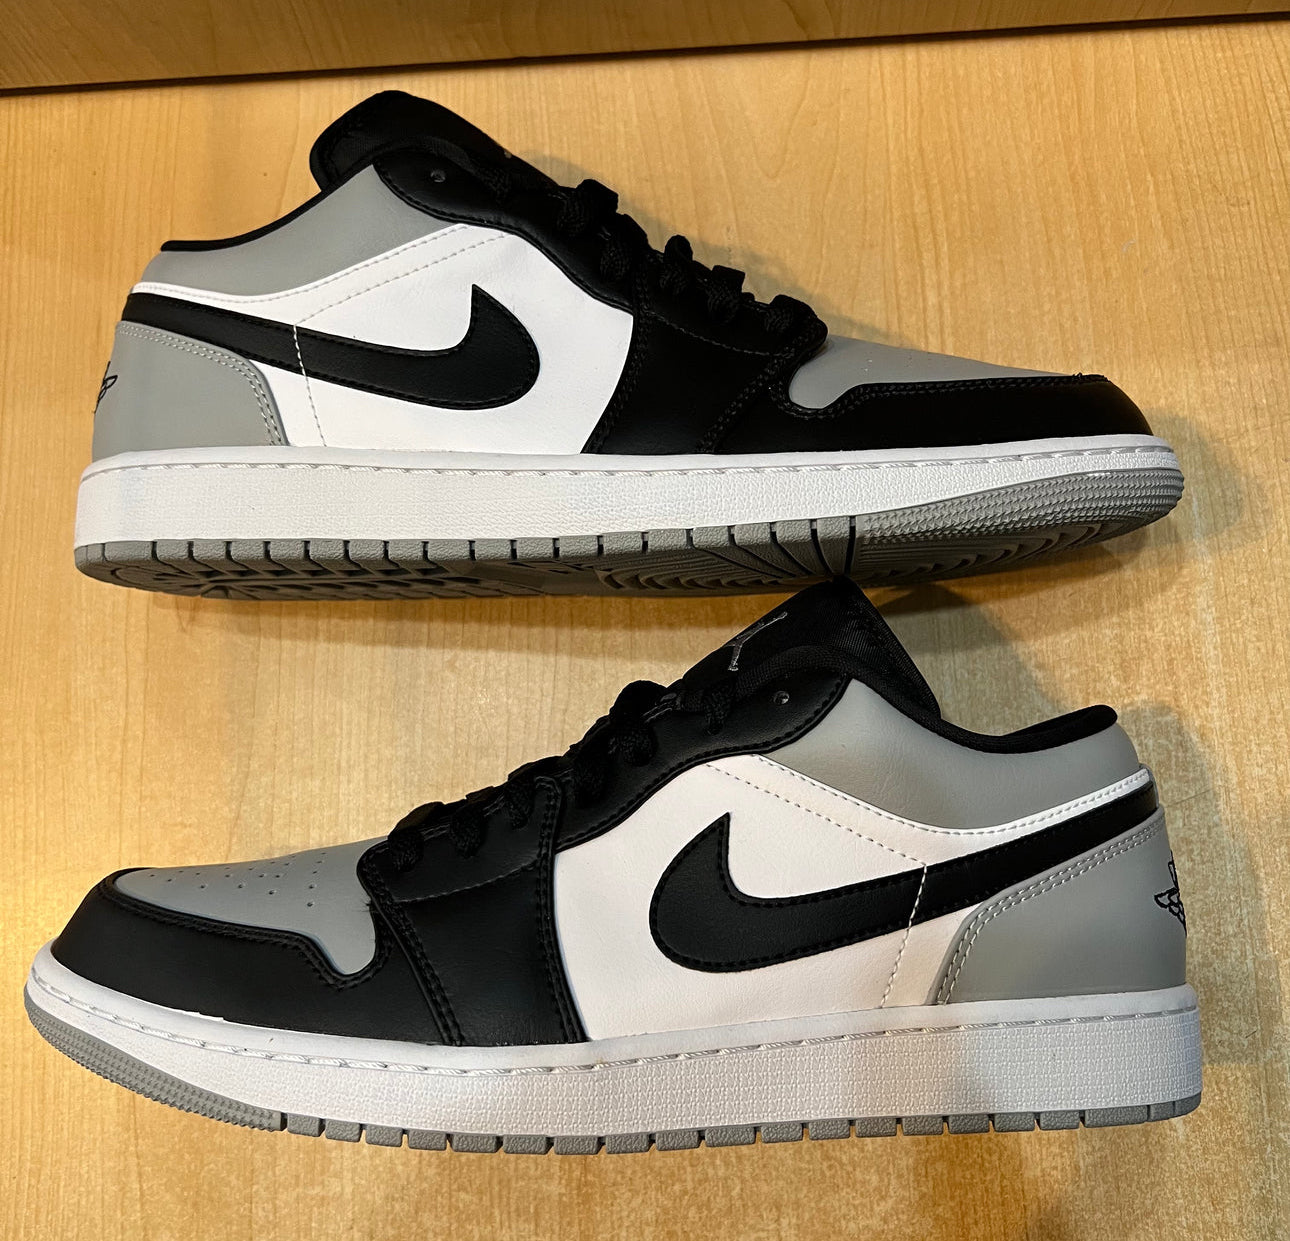 Brand New Shadow Toe Low 1s Size 12